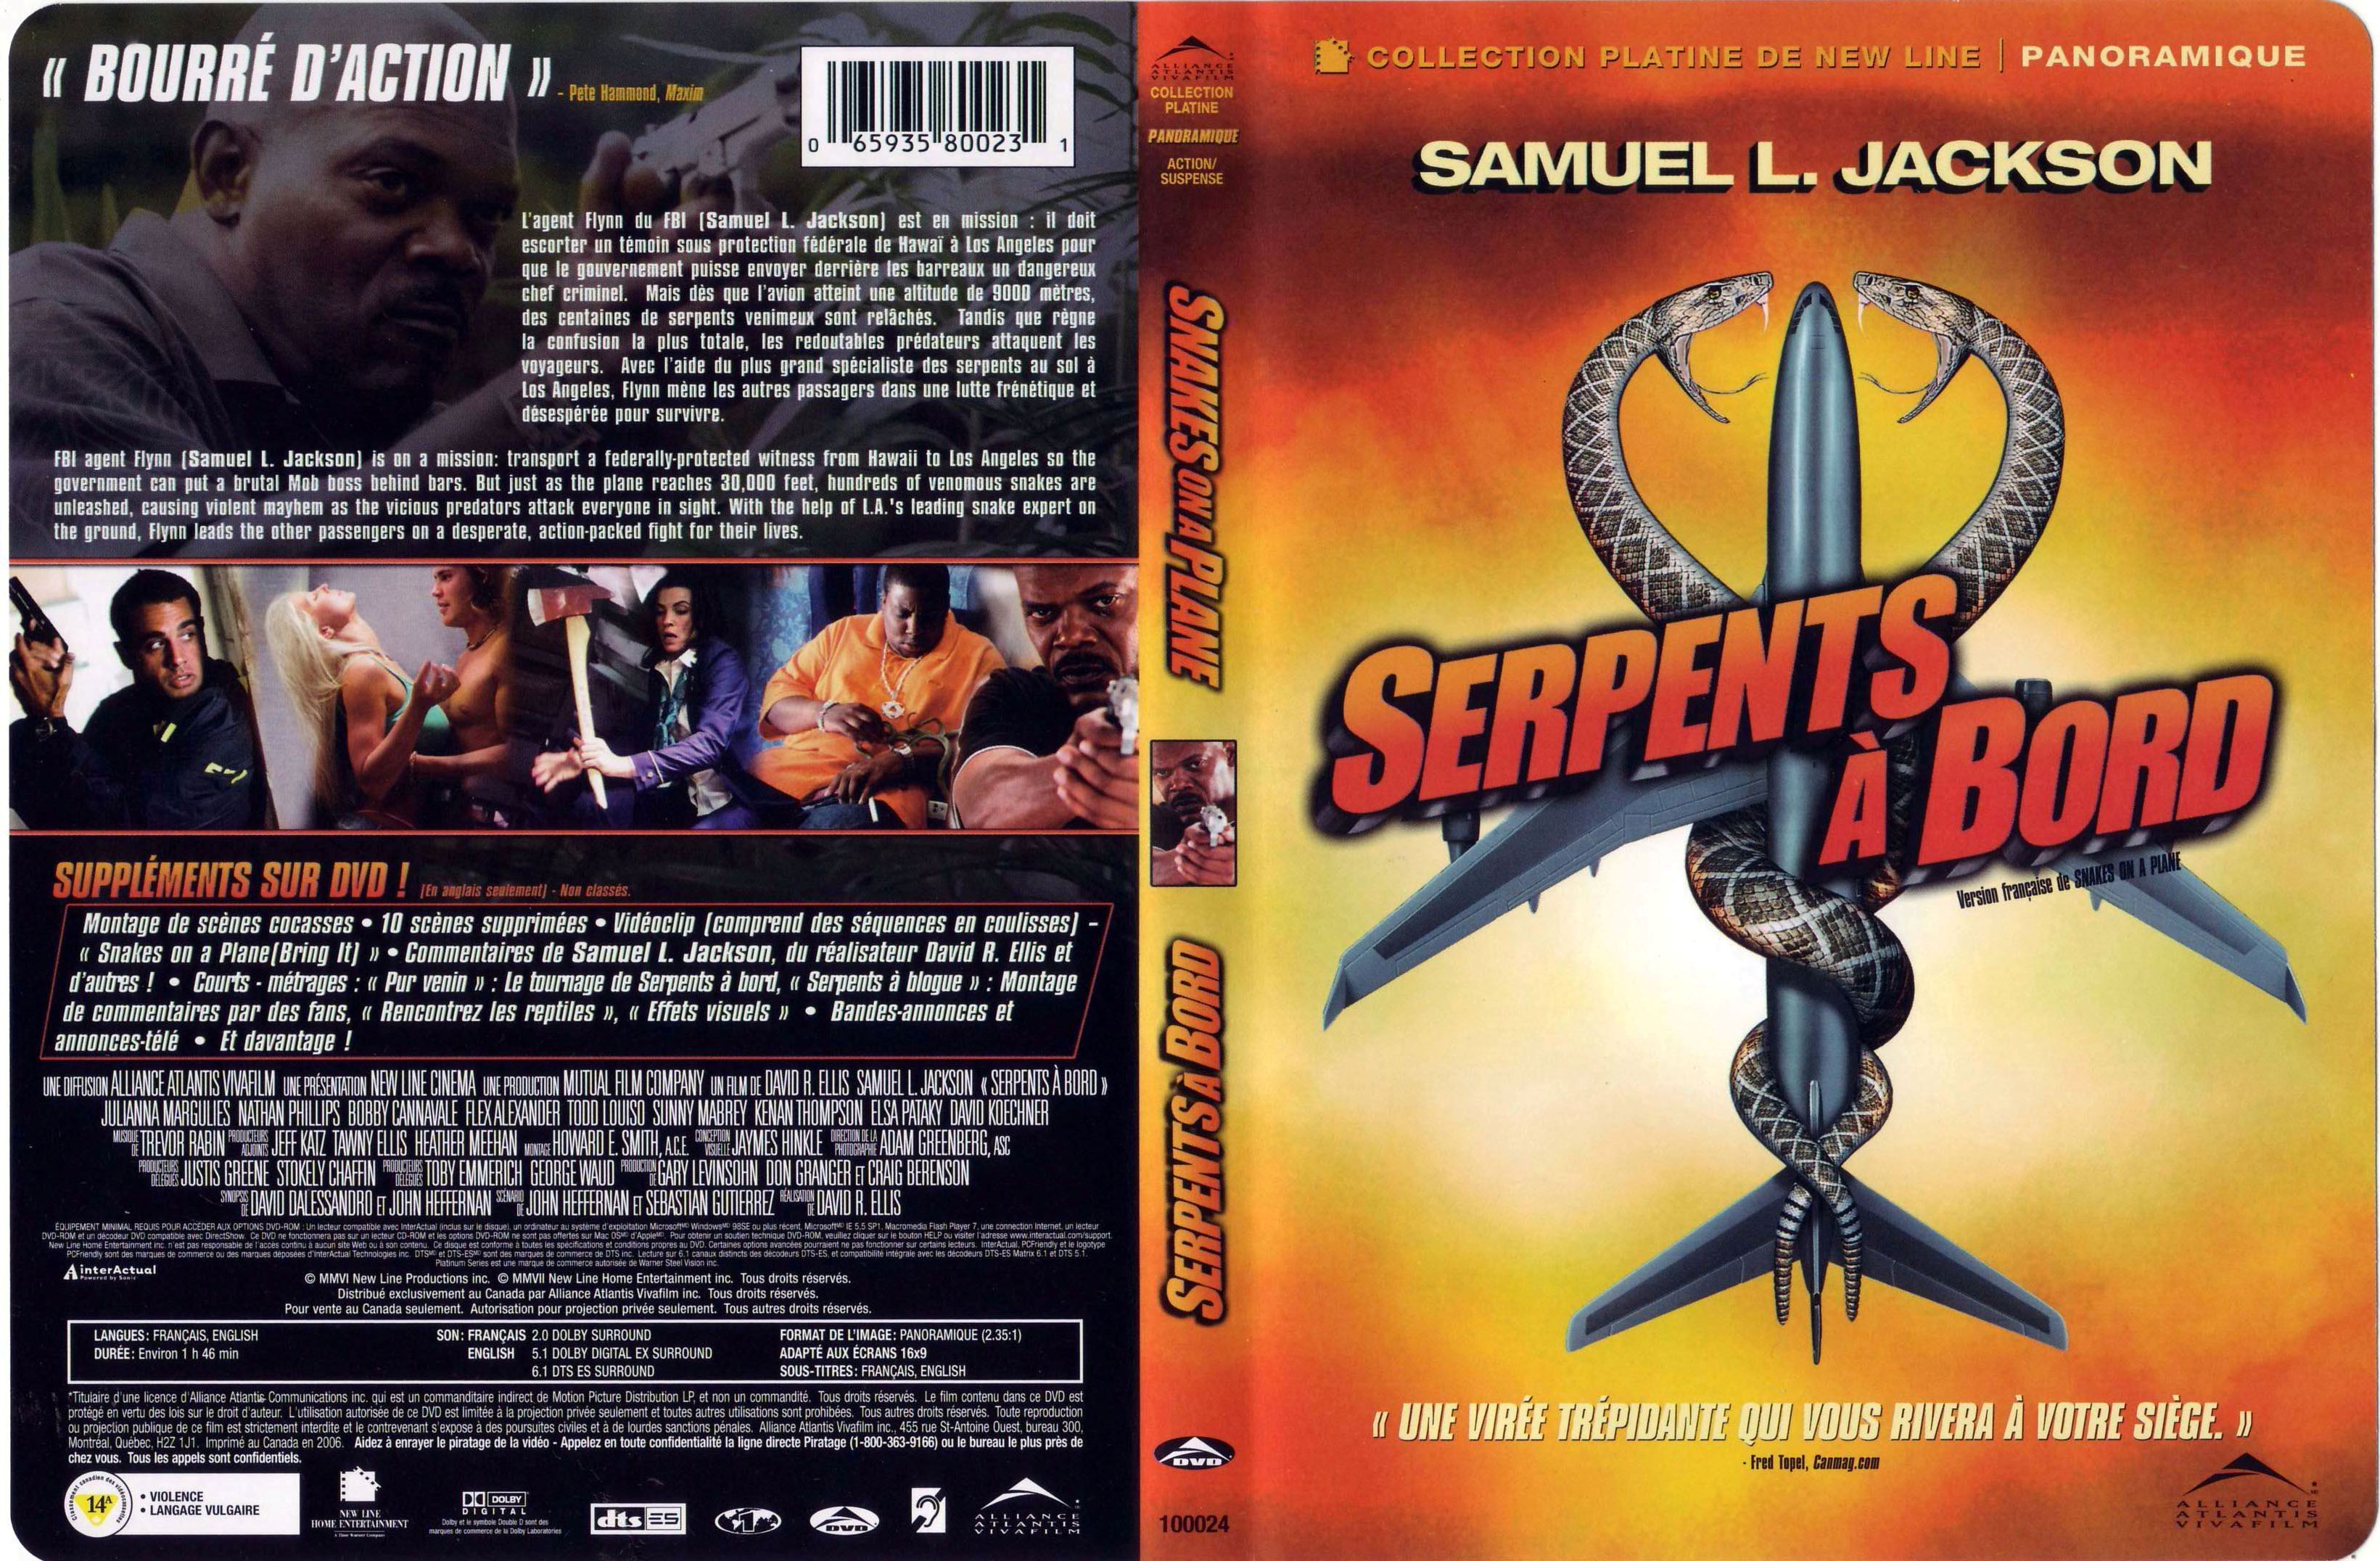 Jaquette DVD Serpents  bord - Snake on the plane (Canadienne)